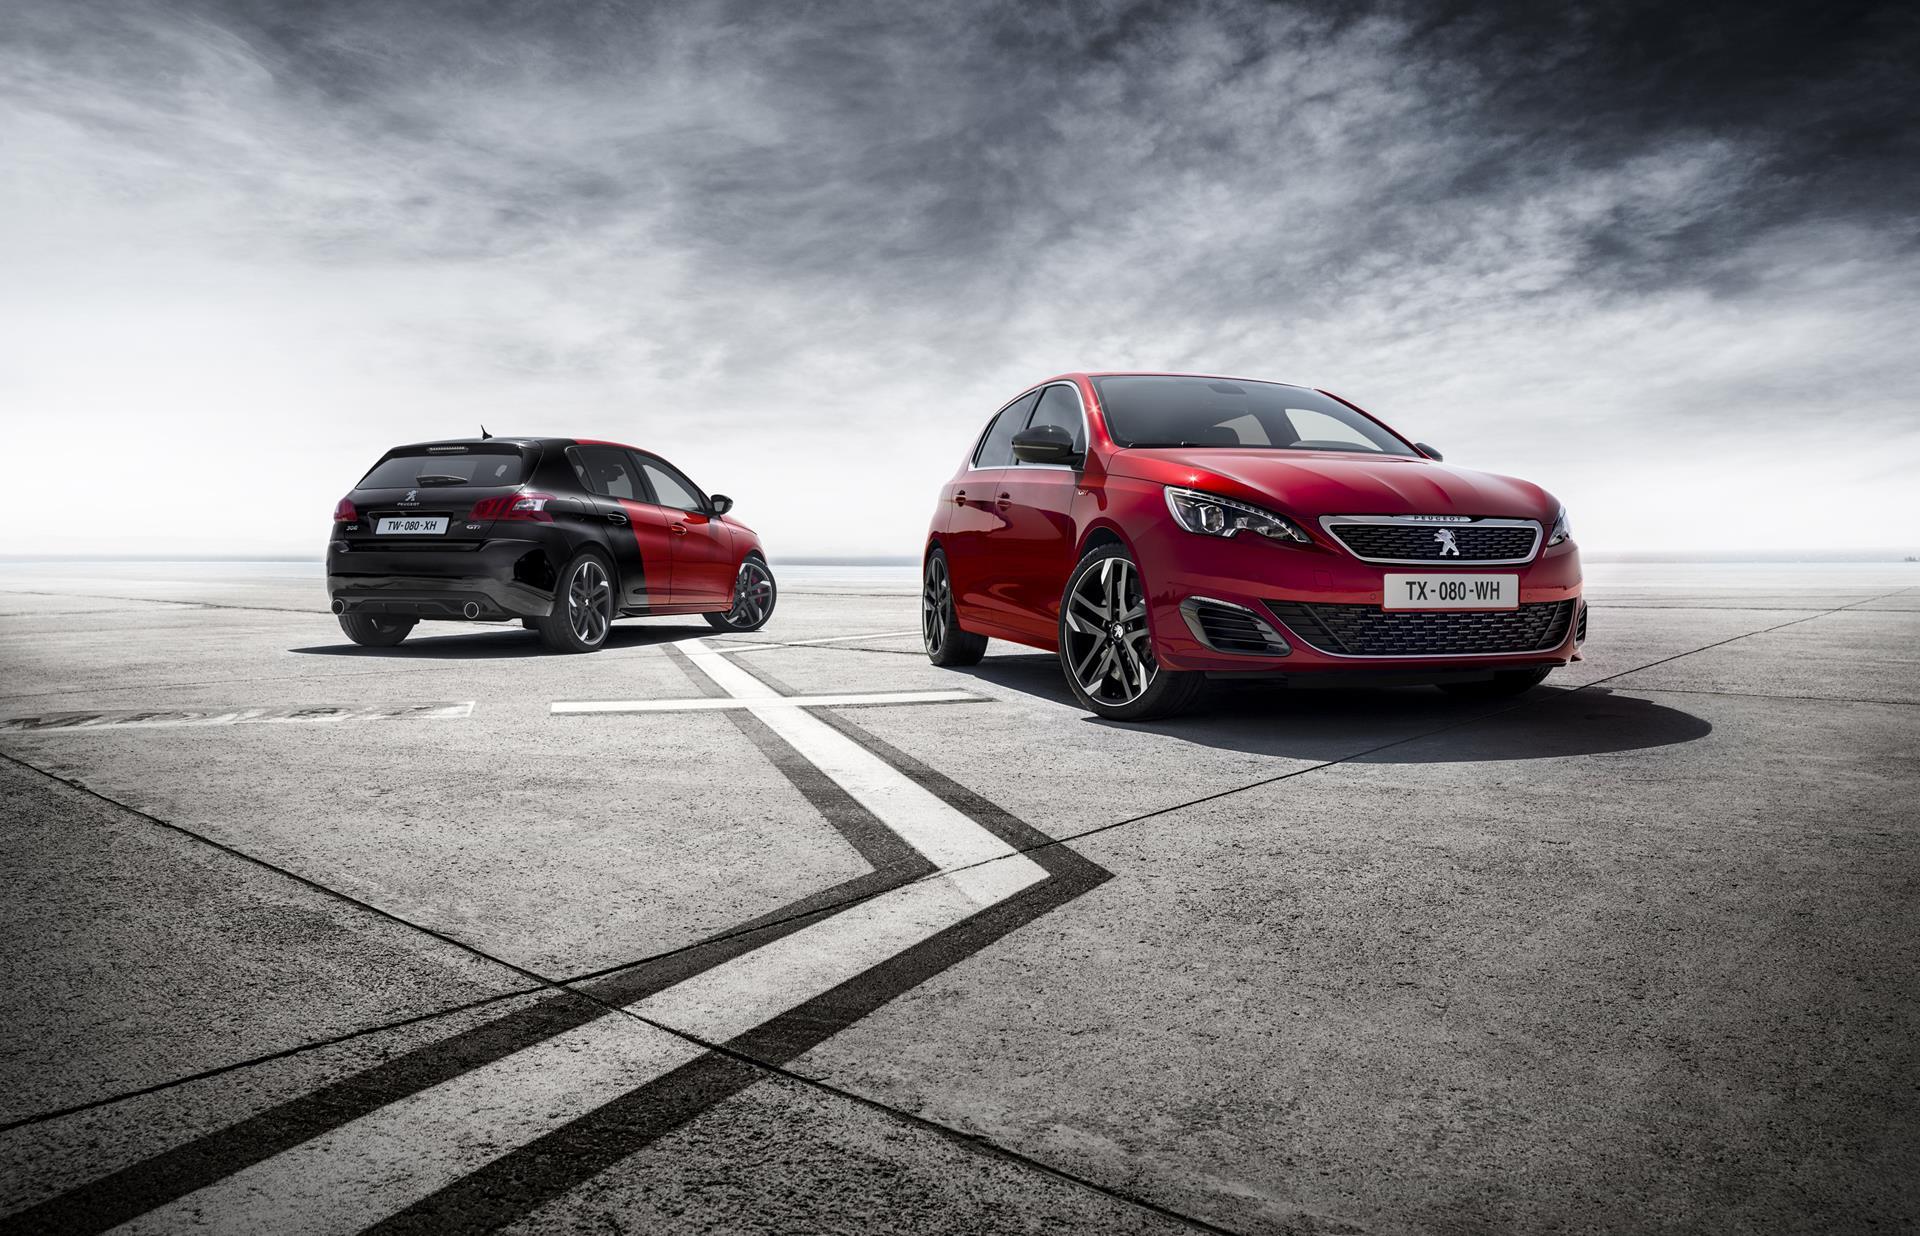 Peugeot 308 GTi Wallpaper and Image Gallery